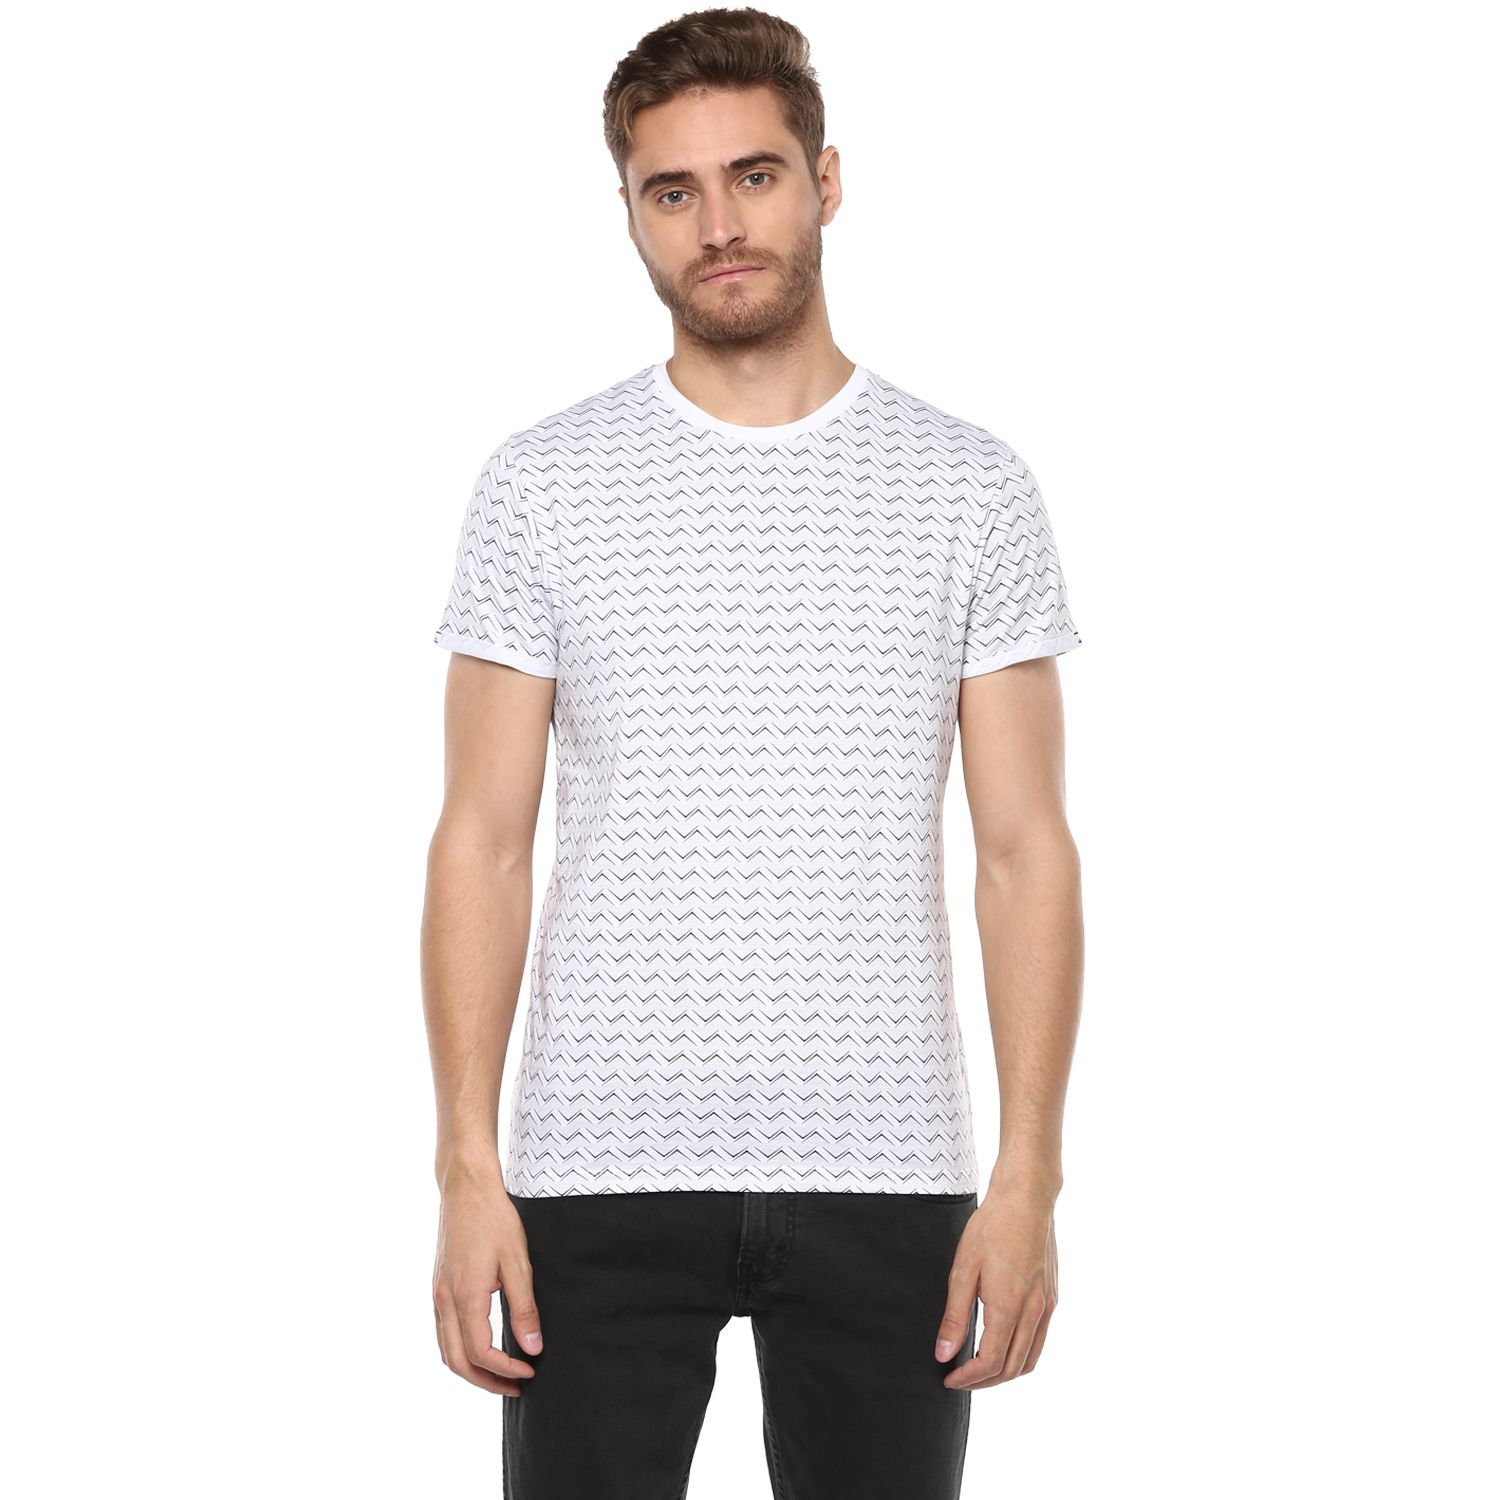 Octave White Round T-Shirt - Buy Octave White Round T-Shirt Online at ...